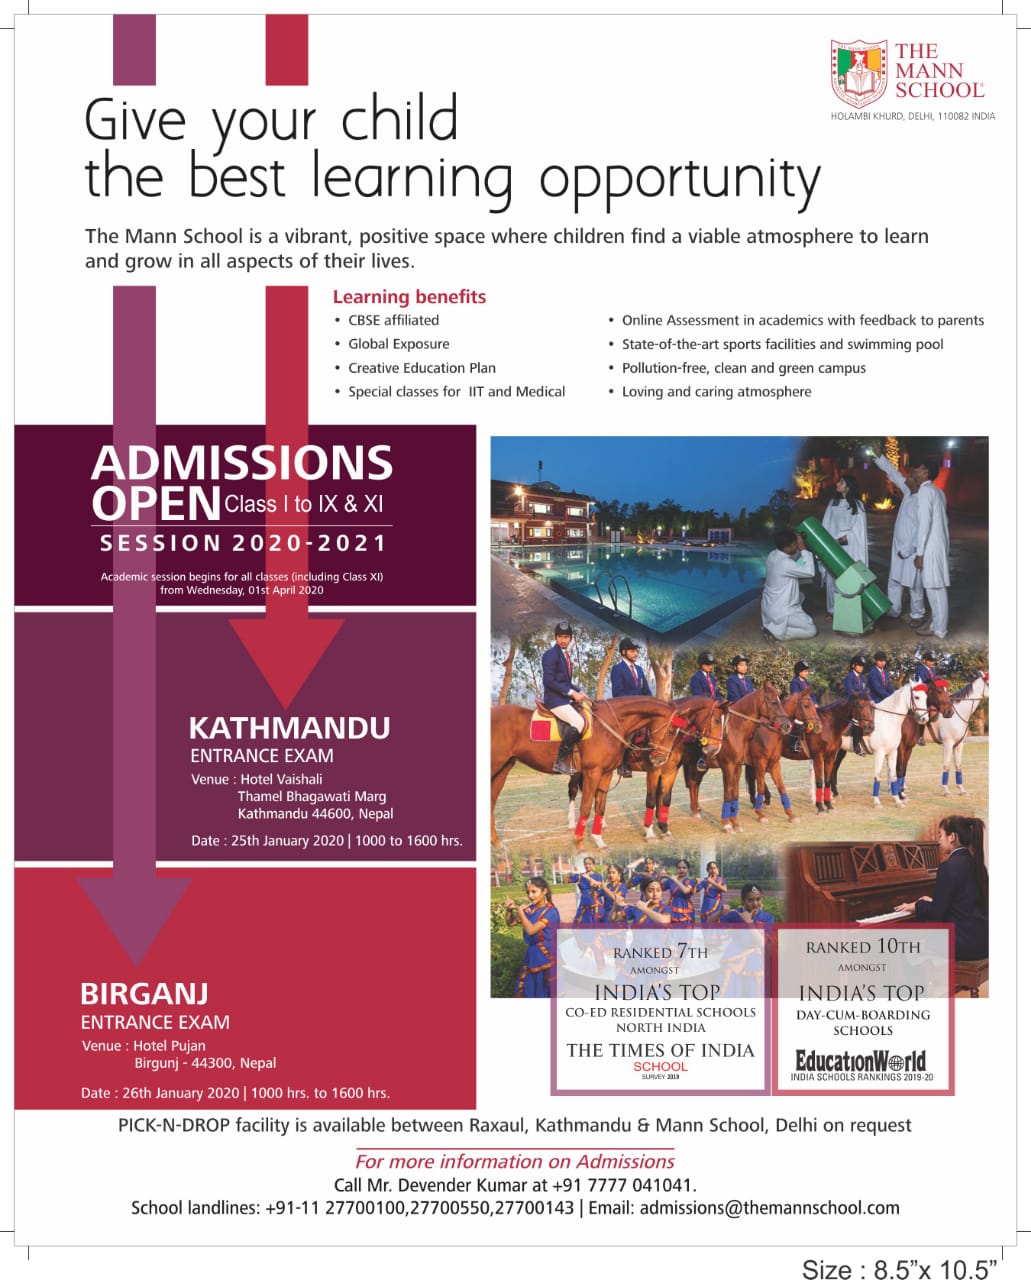 India’s Best Day Cum Boarding School “The Mann School” is organising an entrance exam in Nepal for the session 2020-2021